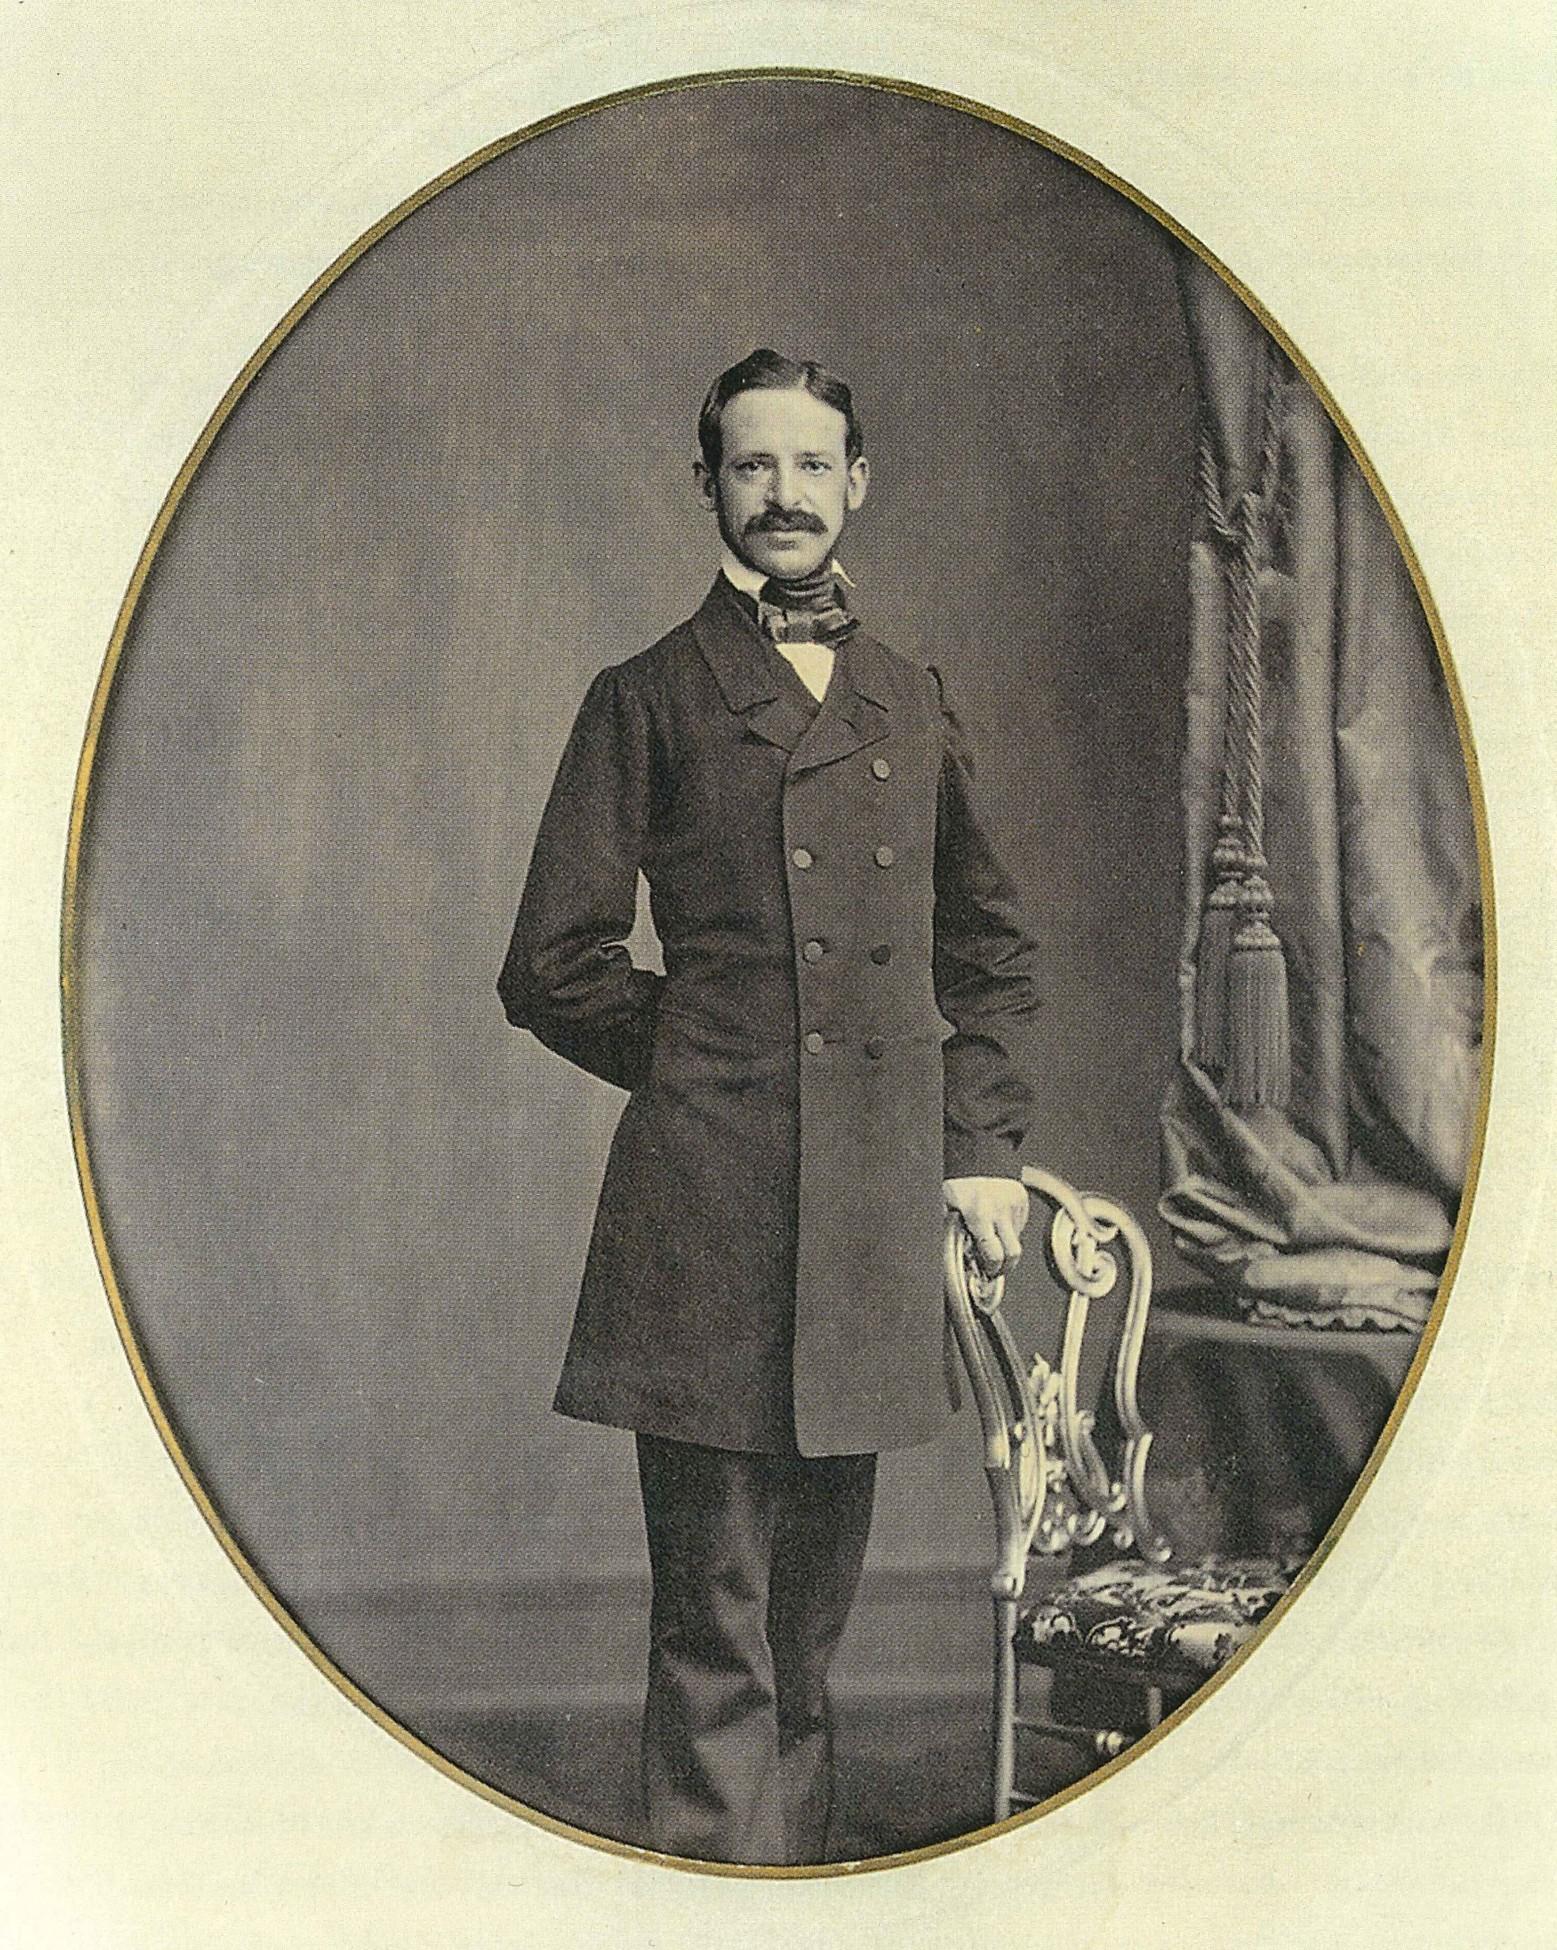 Photo of a young man from late 19 century.